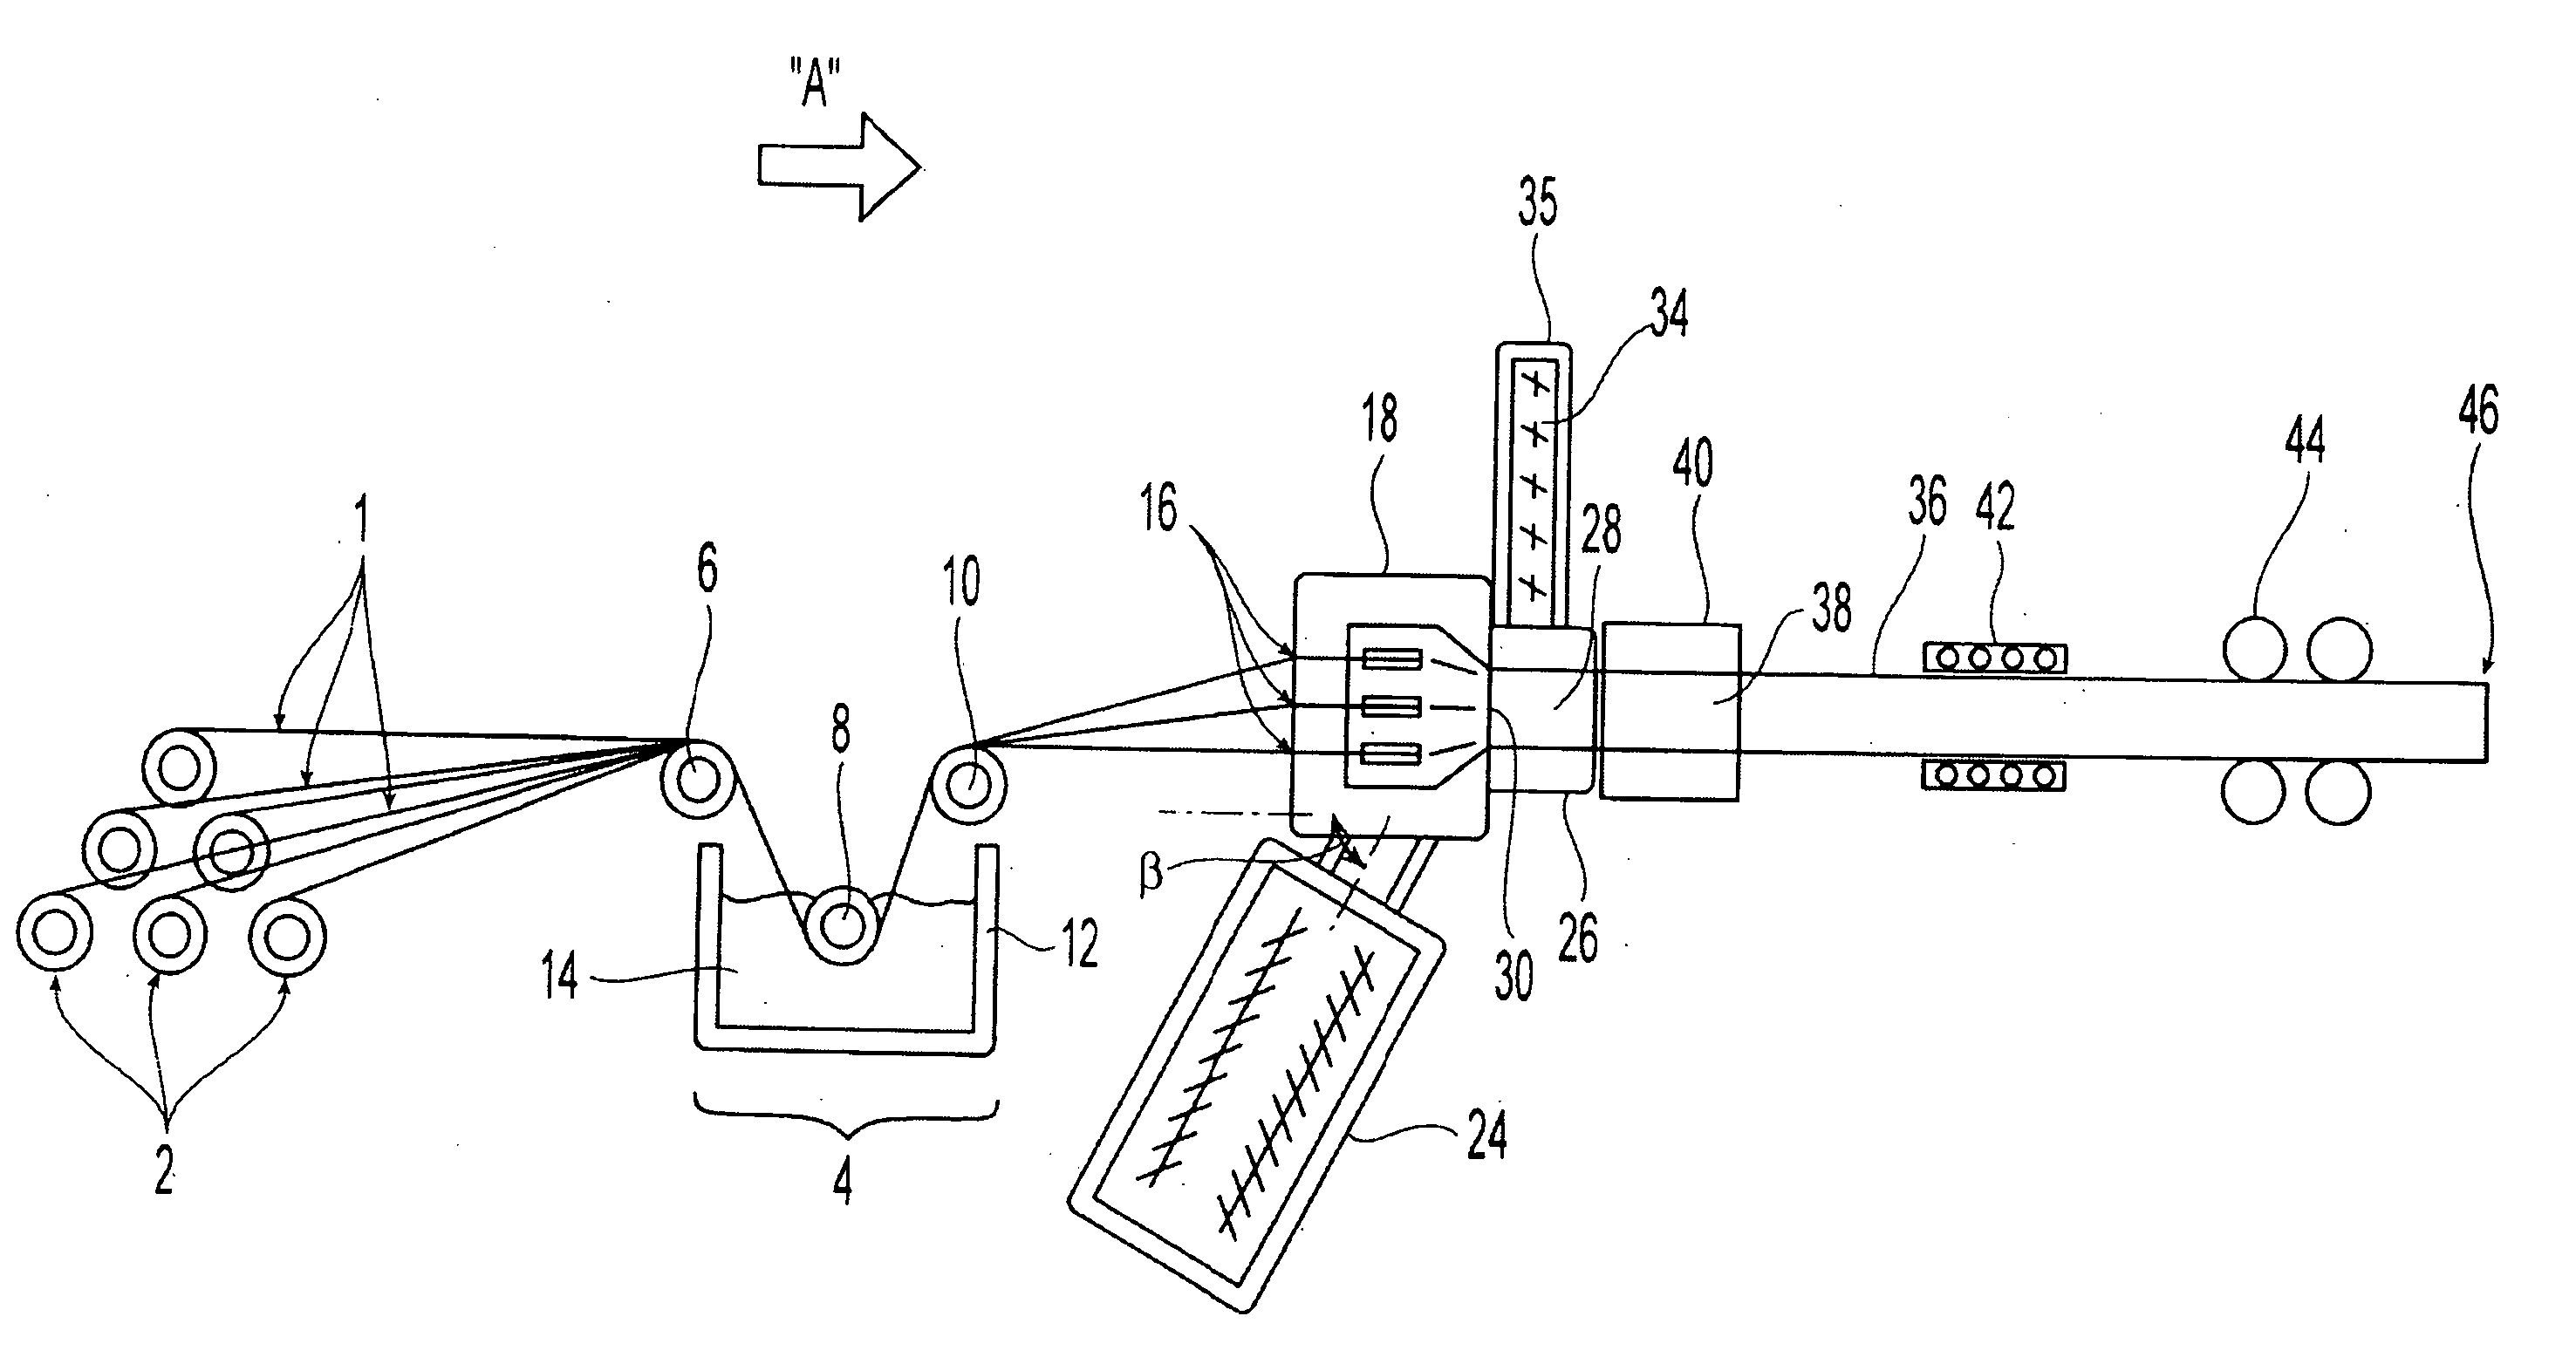 Method of making continuous filament reinforced structural plastic profiles using pultrusion/coextrusion